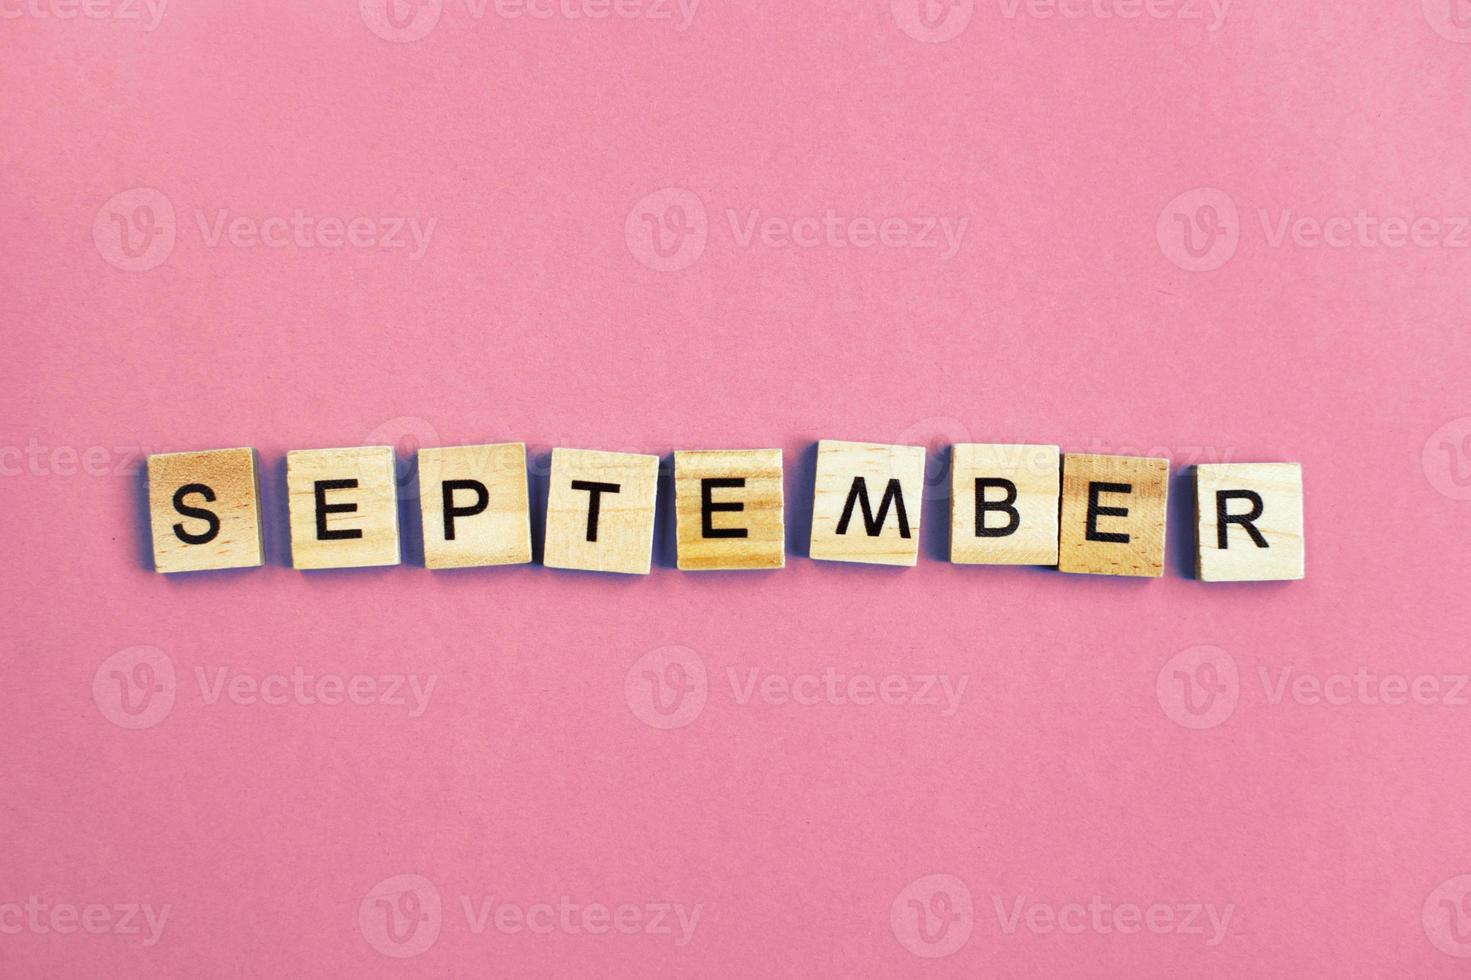 inscription September made by wooden cubes on a pastel pink background. photo